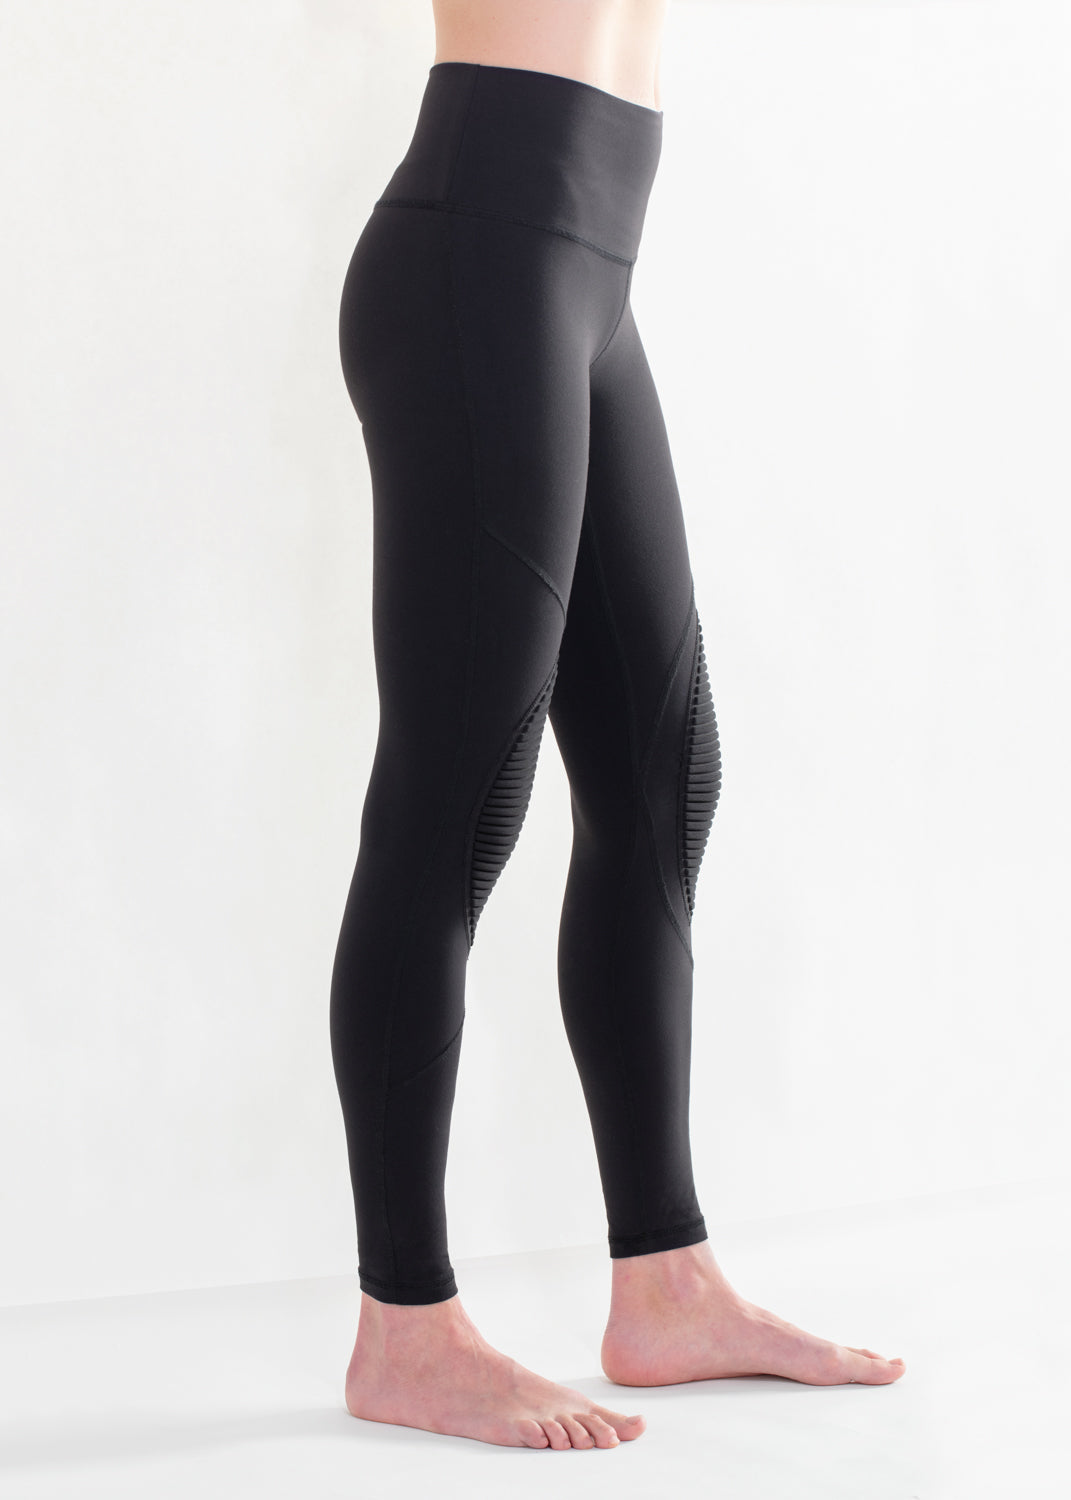 The fit guide to my Light n Tight zyia leggings. I should be